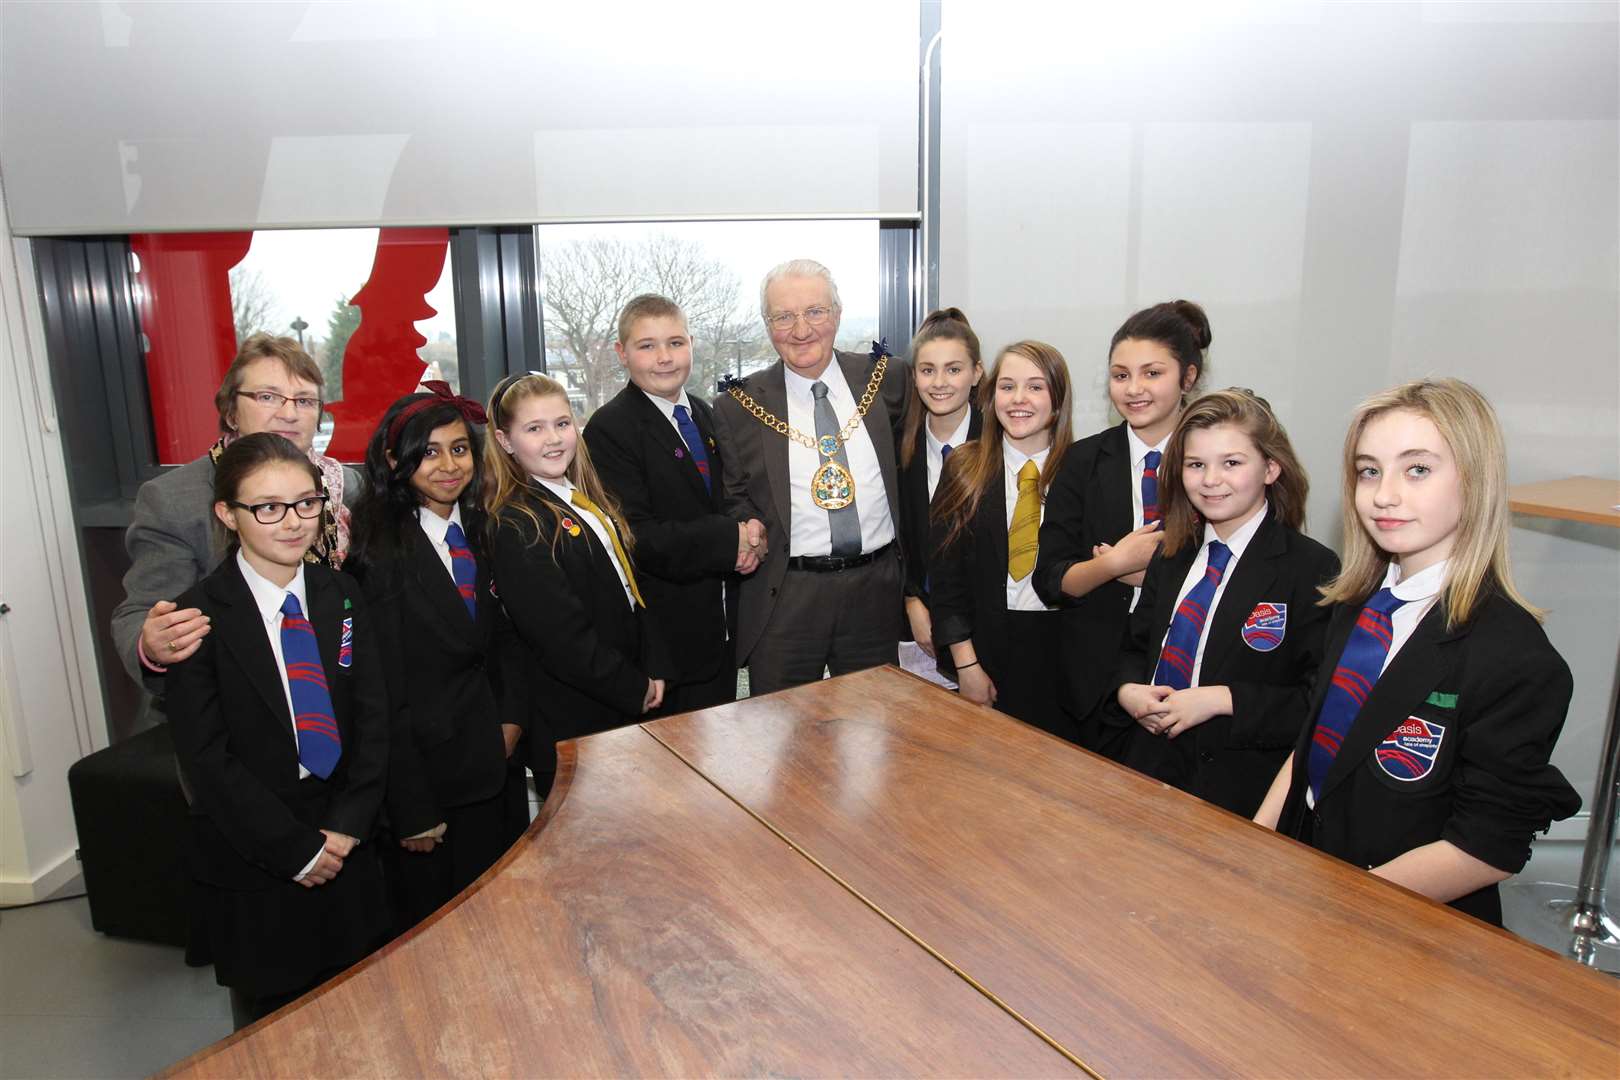 Mayor of Swale Cllr George Bobbin and the Mayoress, Benda Bobbin with pupils from The Oasis Academy